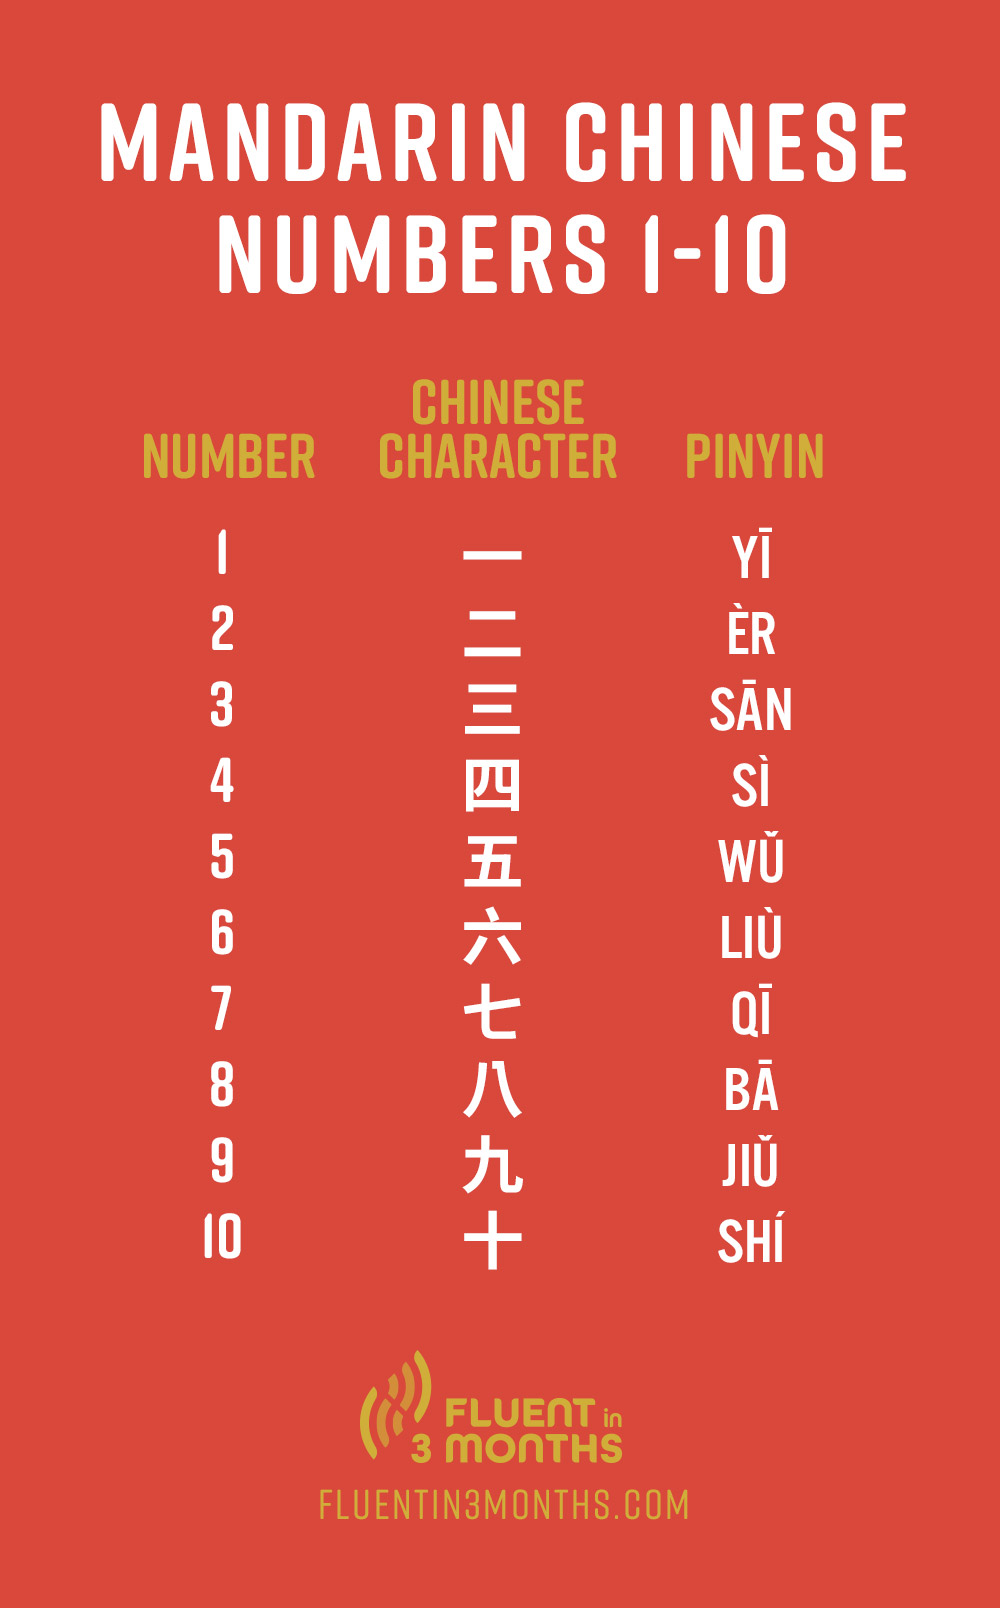 chinese-numbers-your-go-to-guide-for-counting-in-chinese-from-0-100